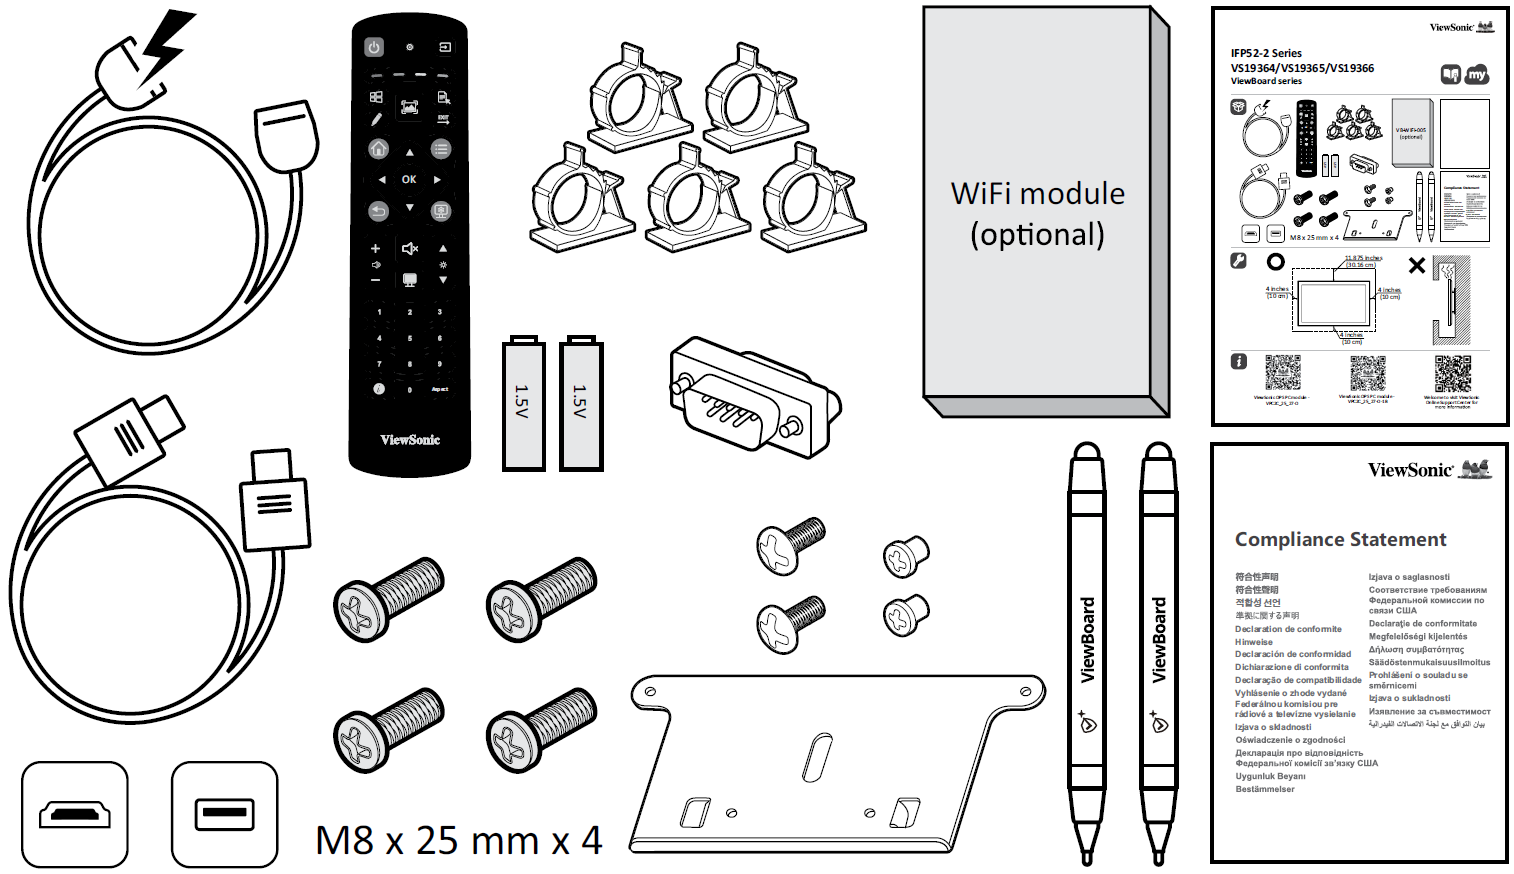 File:IFP52-2 Package Contents.png